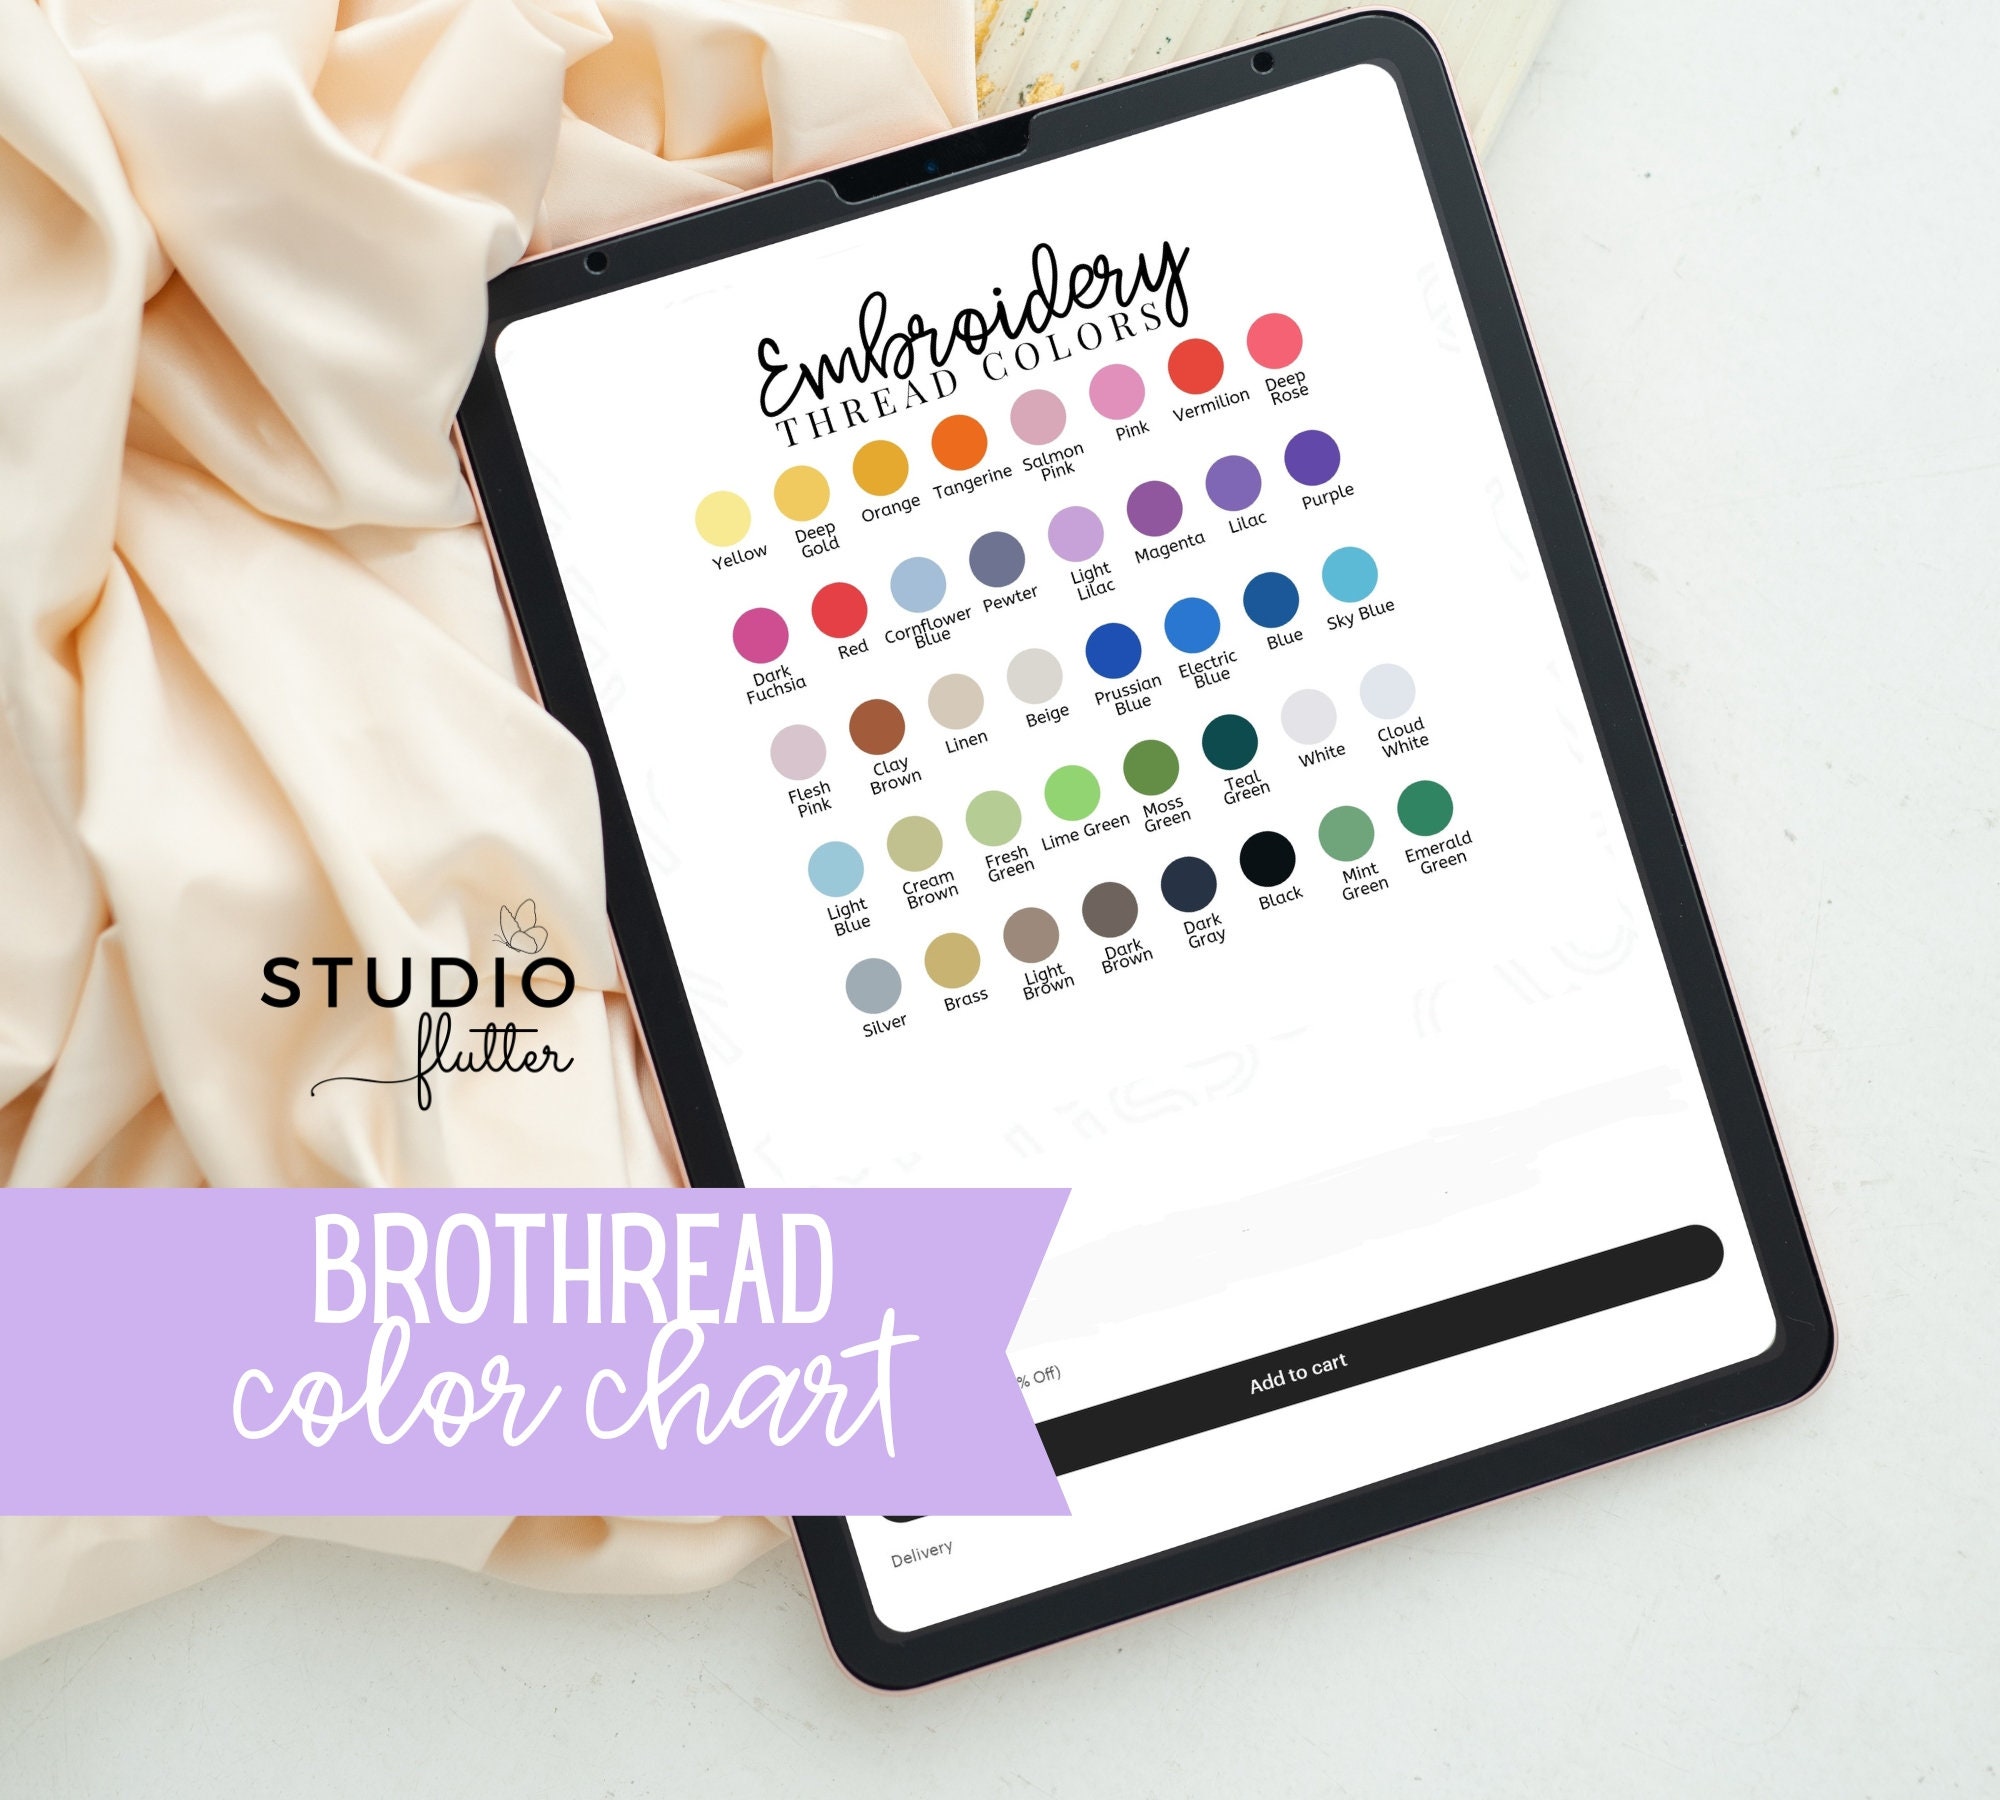 Custom Embroidery Thread Colors, Guidelines & Resources